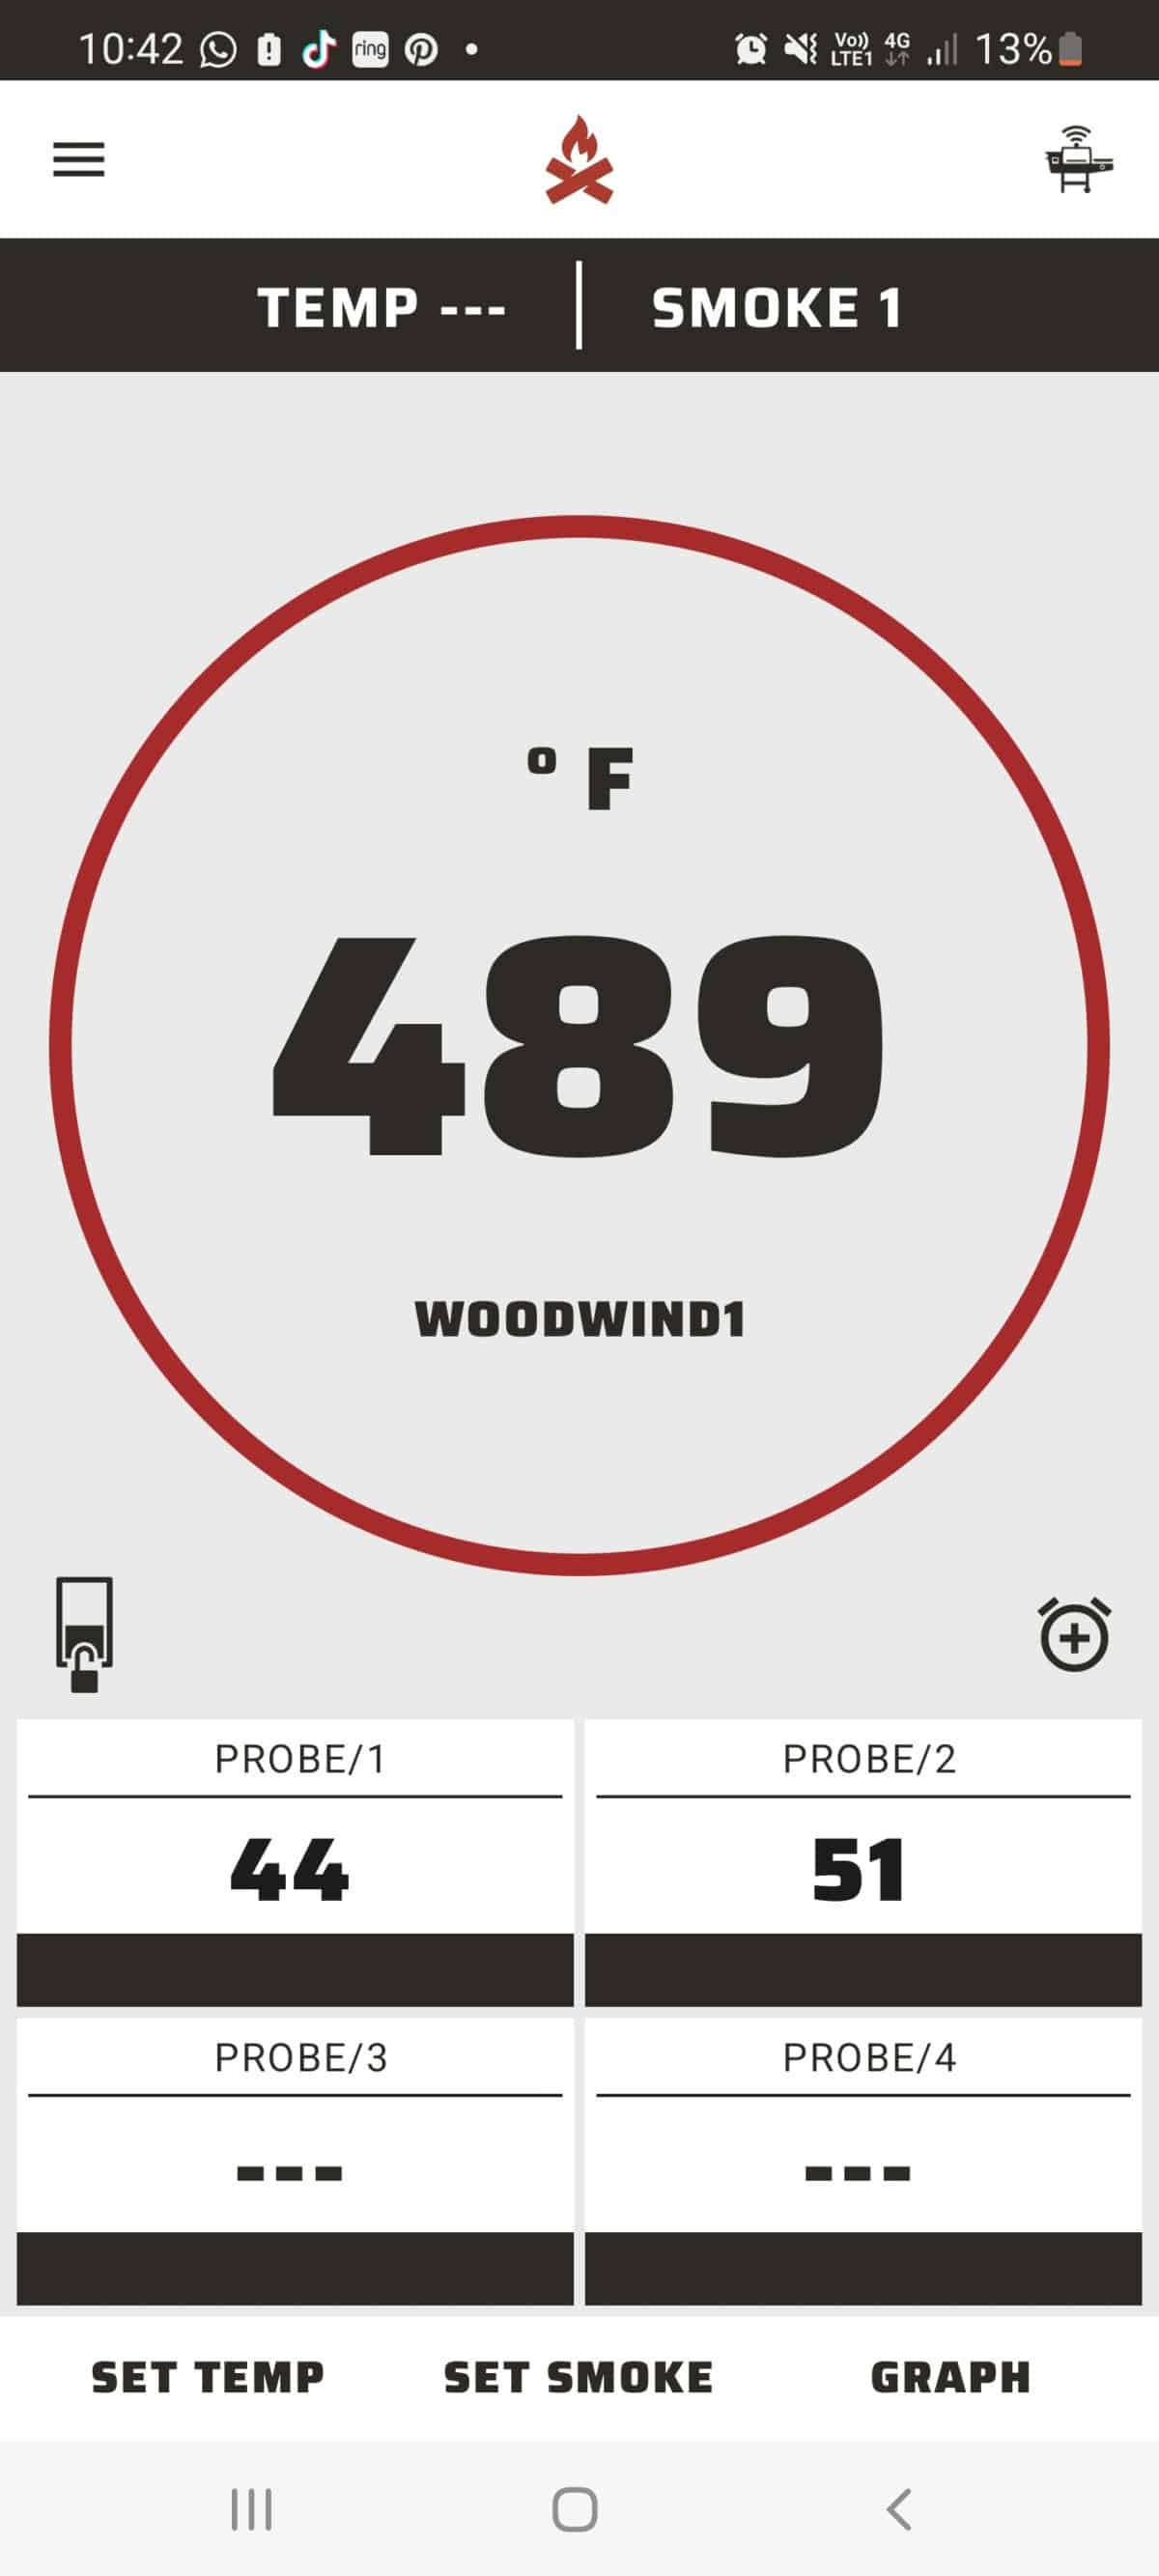 Camp Chef grill controlling smartphone app screenshot showing the temperature screen of a Woodwind Wi-Fi 36 grill.